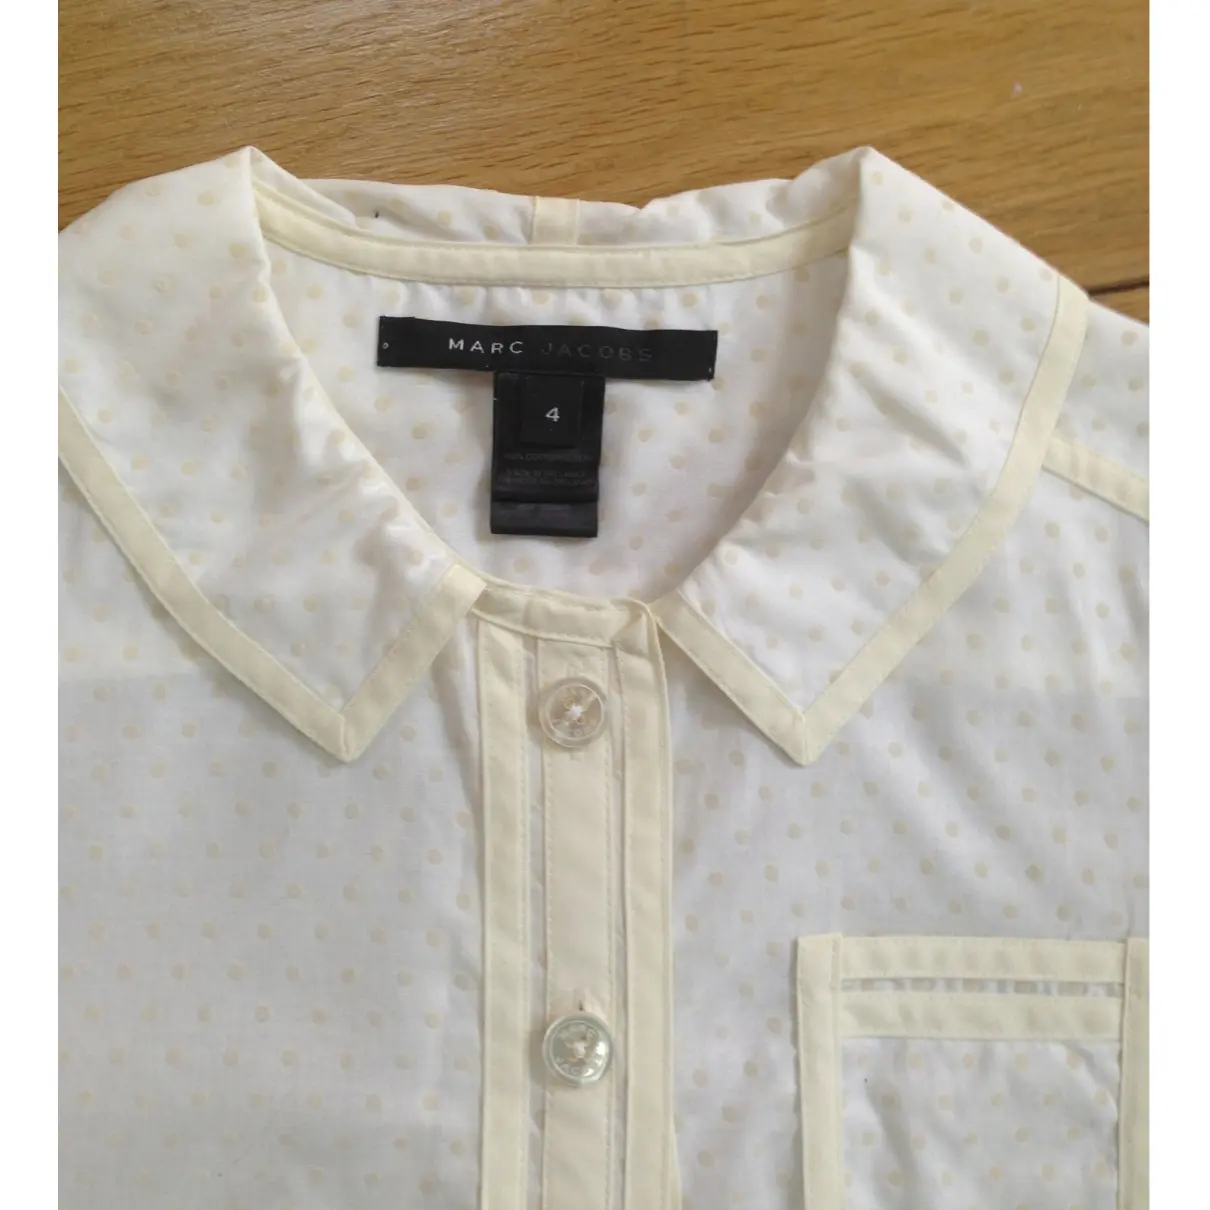 Marc by Marc Jacobs Shirt for sale